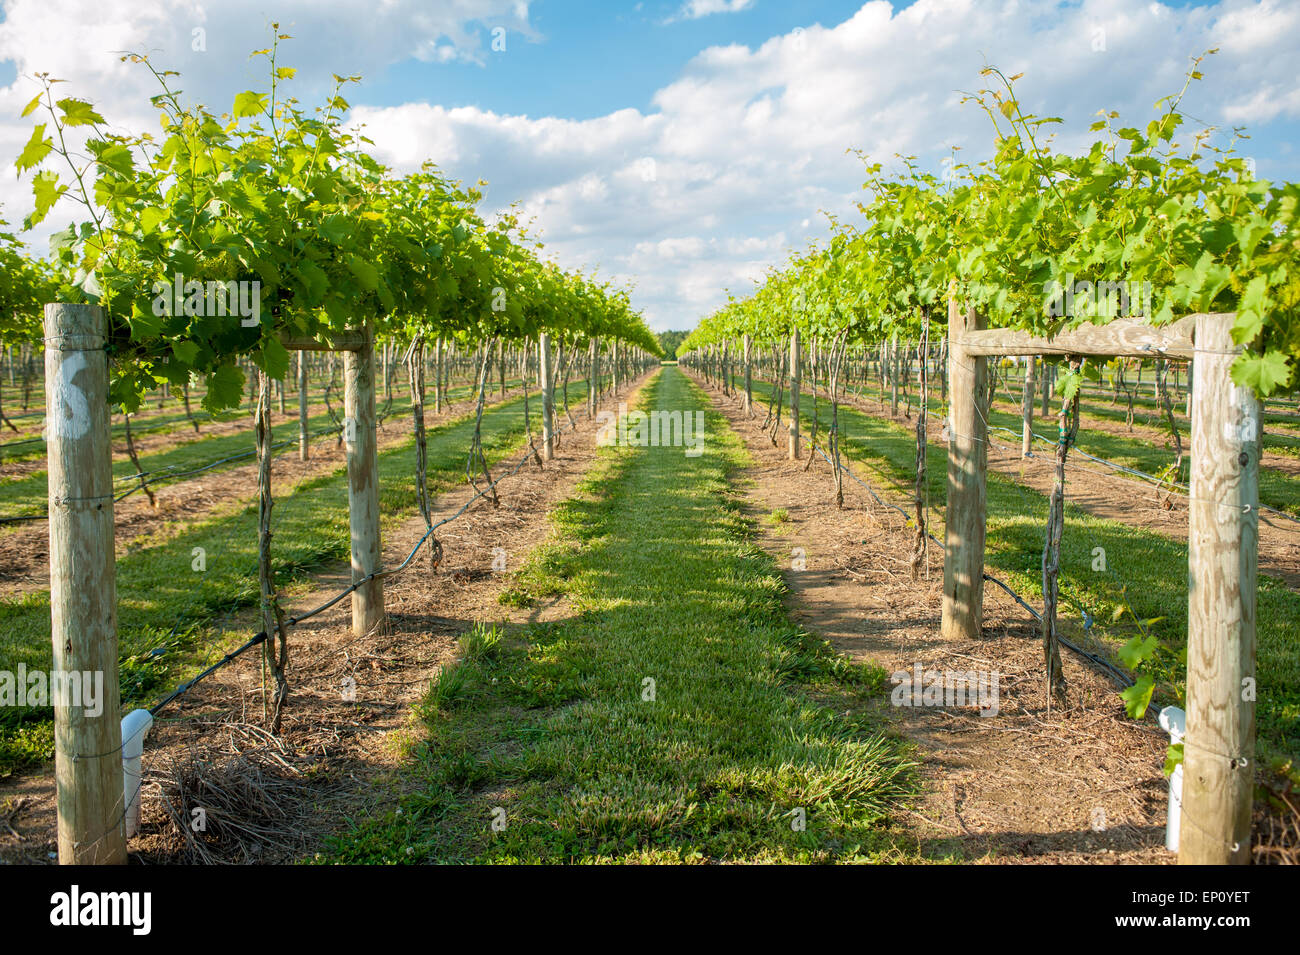 Vineyard in Dorchester county, Maryland, USA Stock Photo